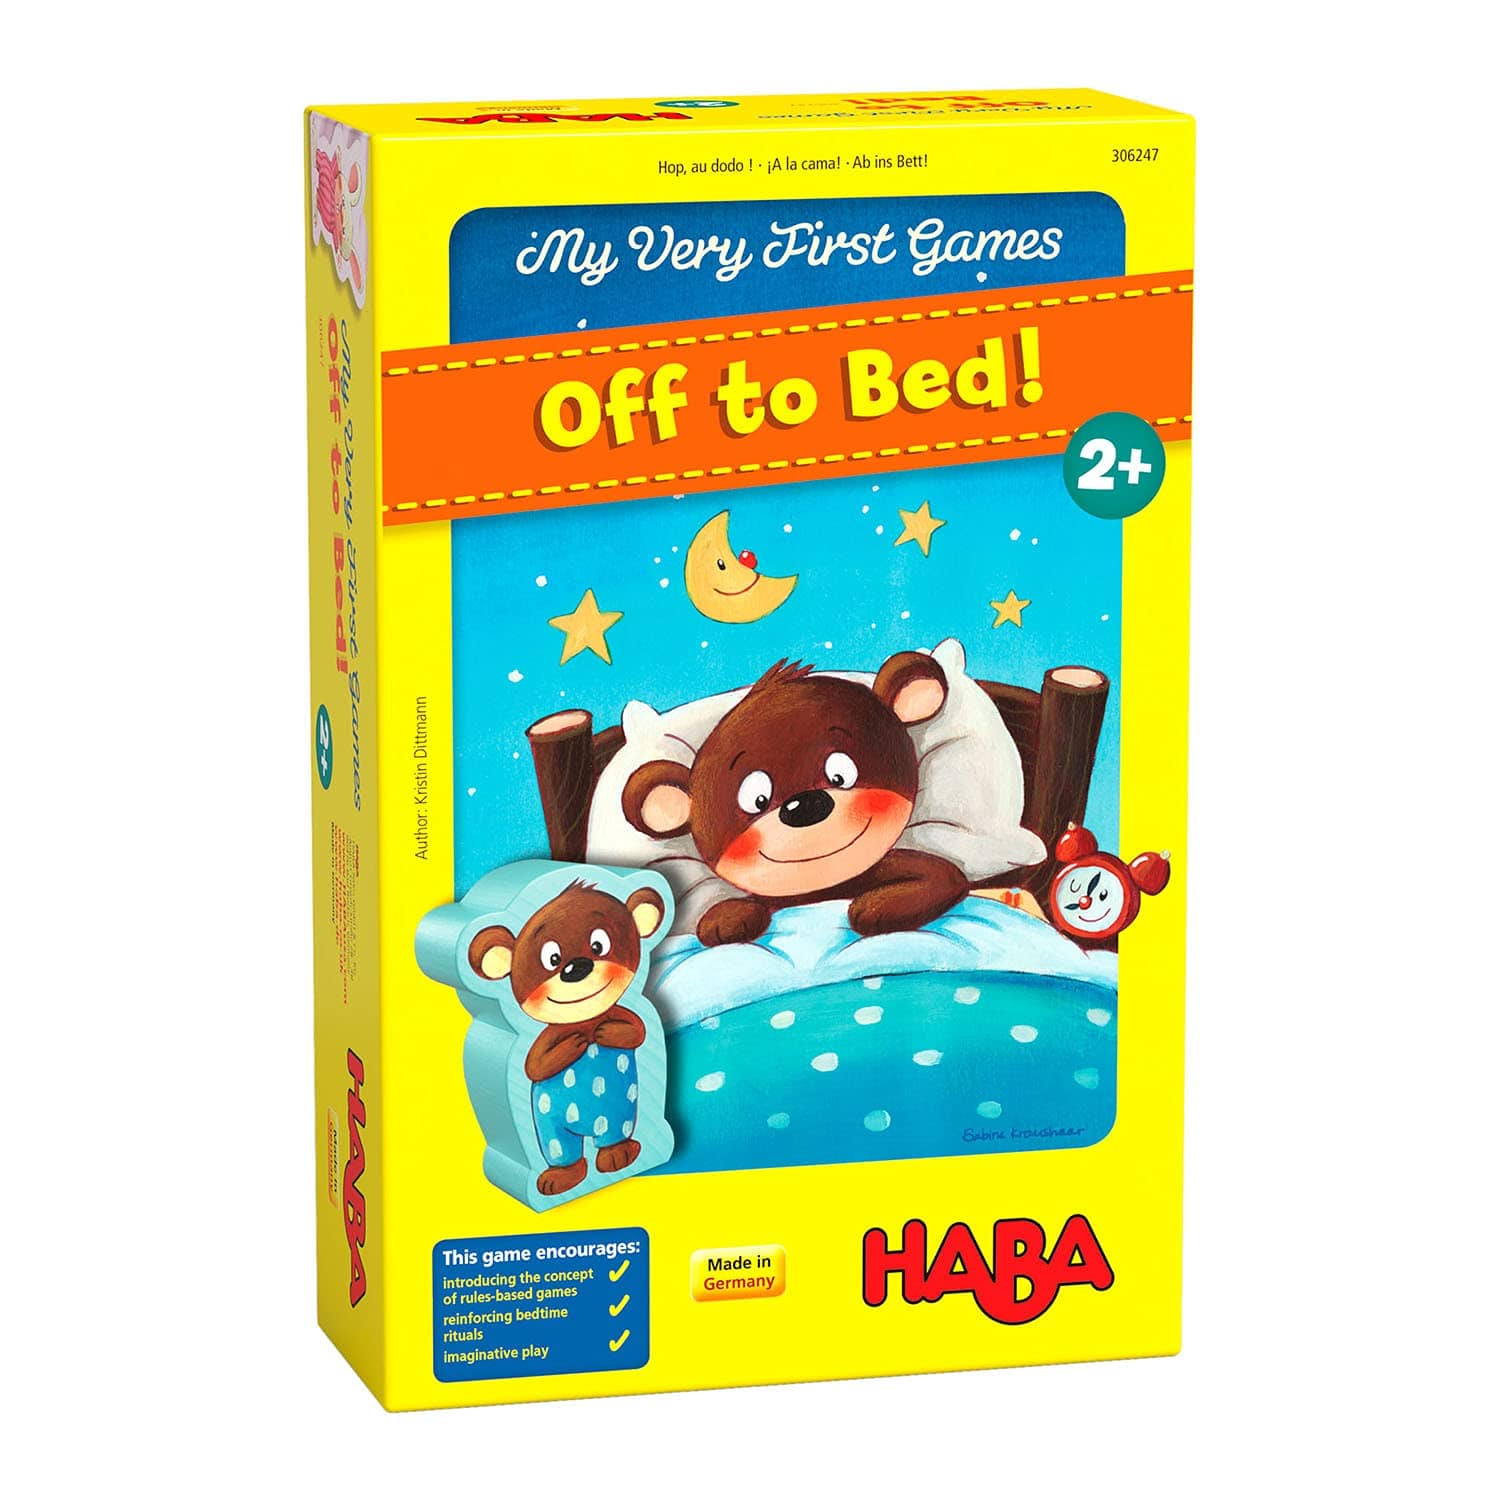 Haba Usa Board Games Haba Usa My Very First Games: Off to Bed